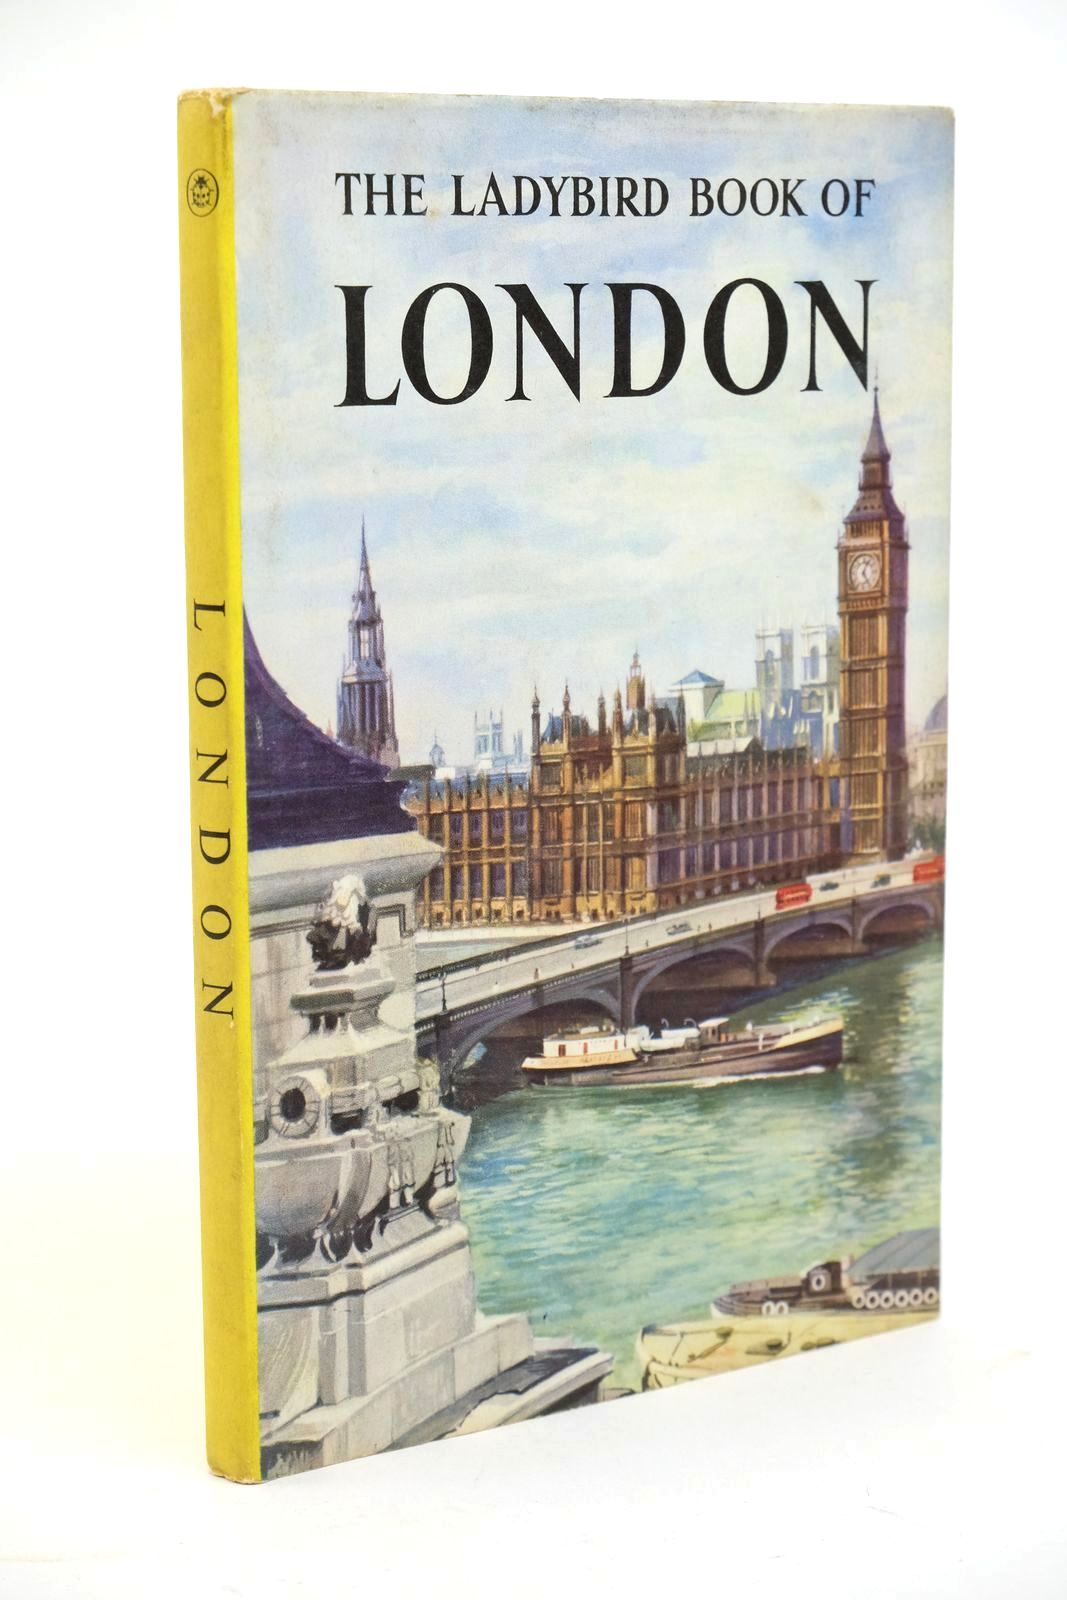 Photo of THE LADYBIRD BOOK OF LONDON written by Lewesdon, John illustrated by Berry, John published by Wills &amp; Hepworth Ltd. (STOCK CODE: 1323150)  for sale by Stella & Rose's Books